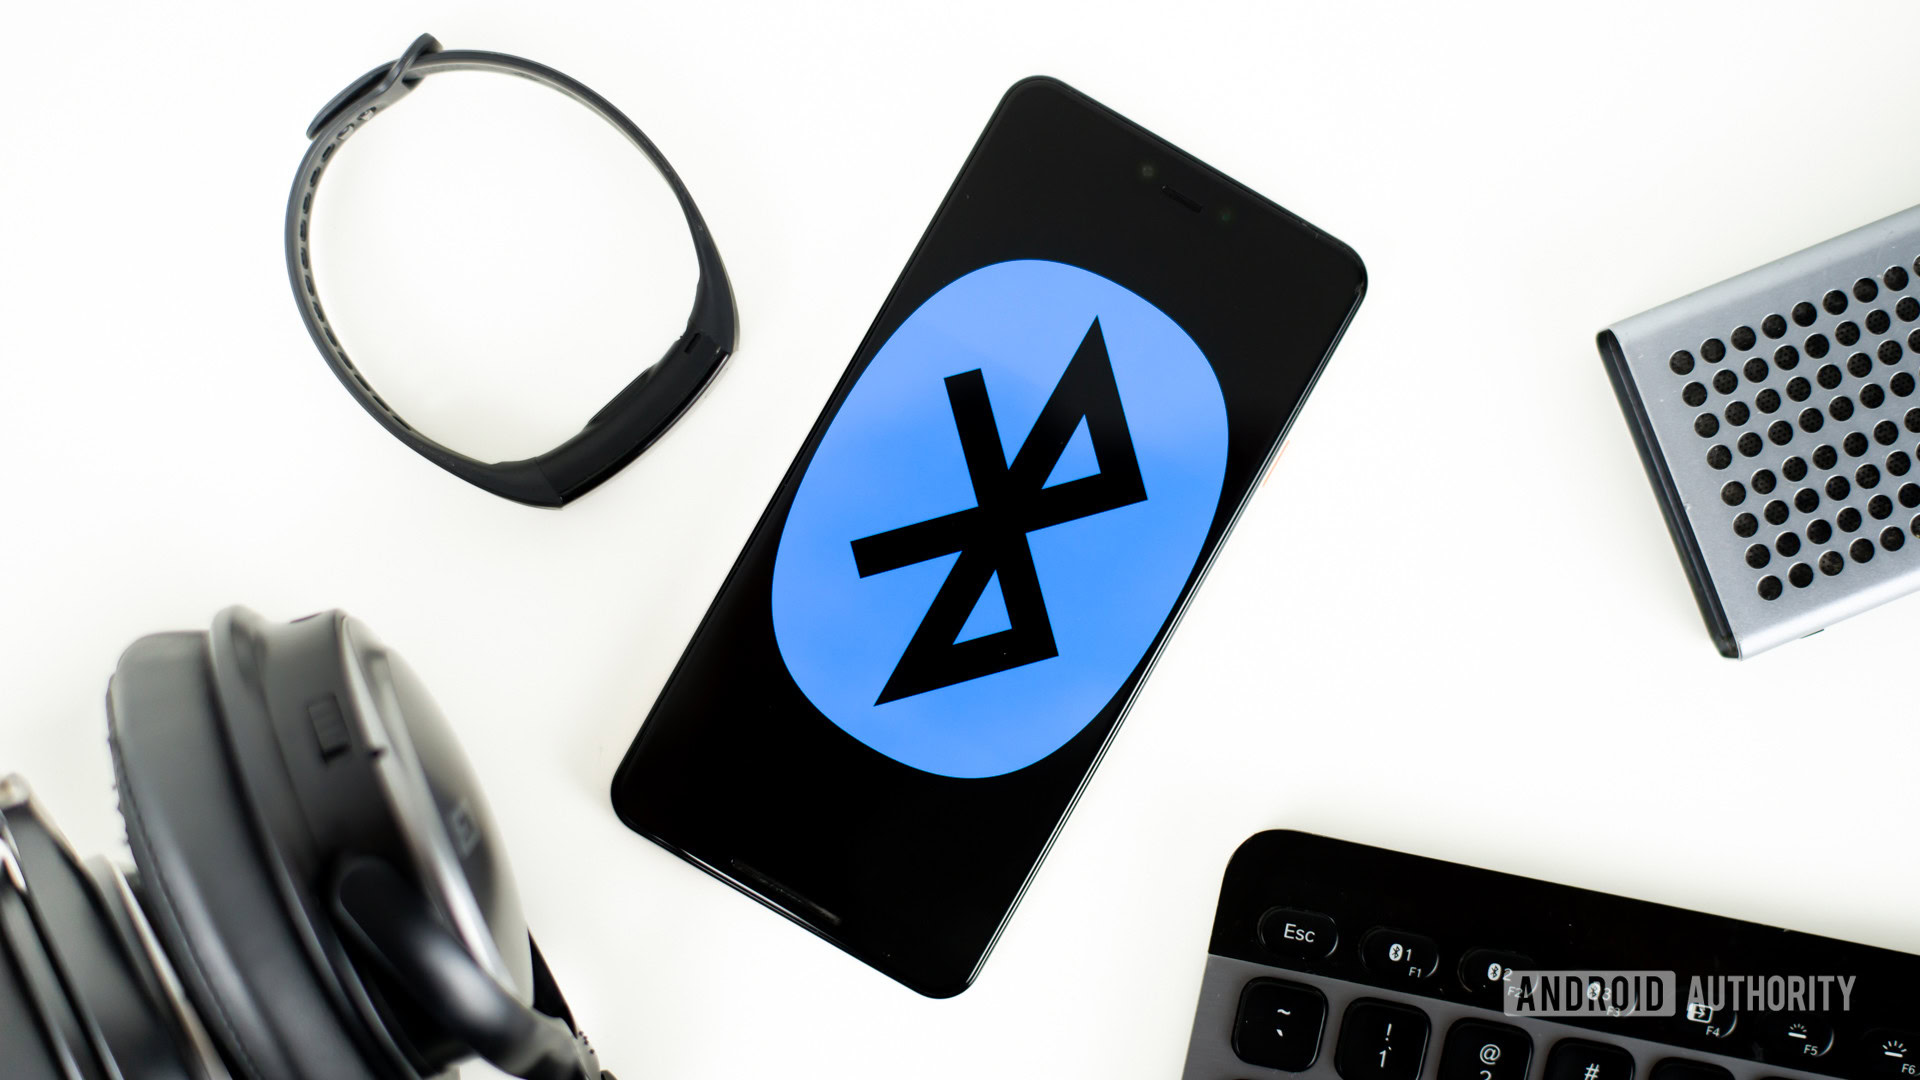 Bluetooth connection problems? Here are 11 fixes - Android Authority